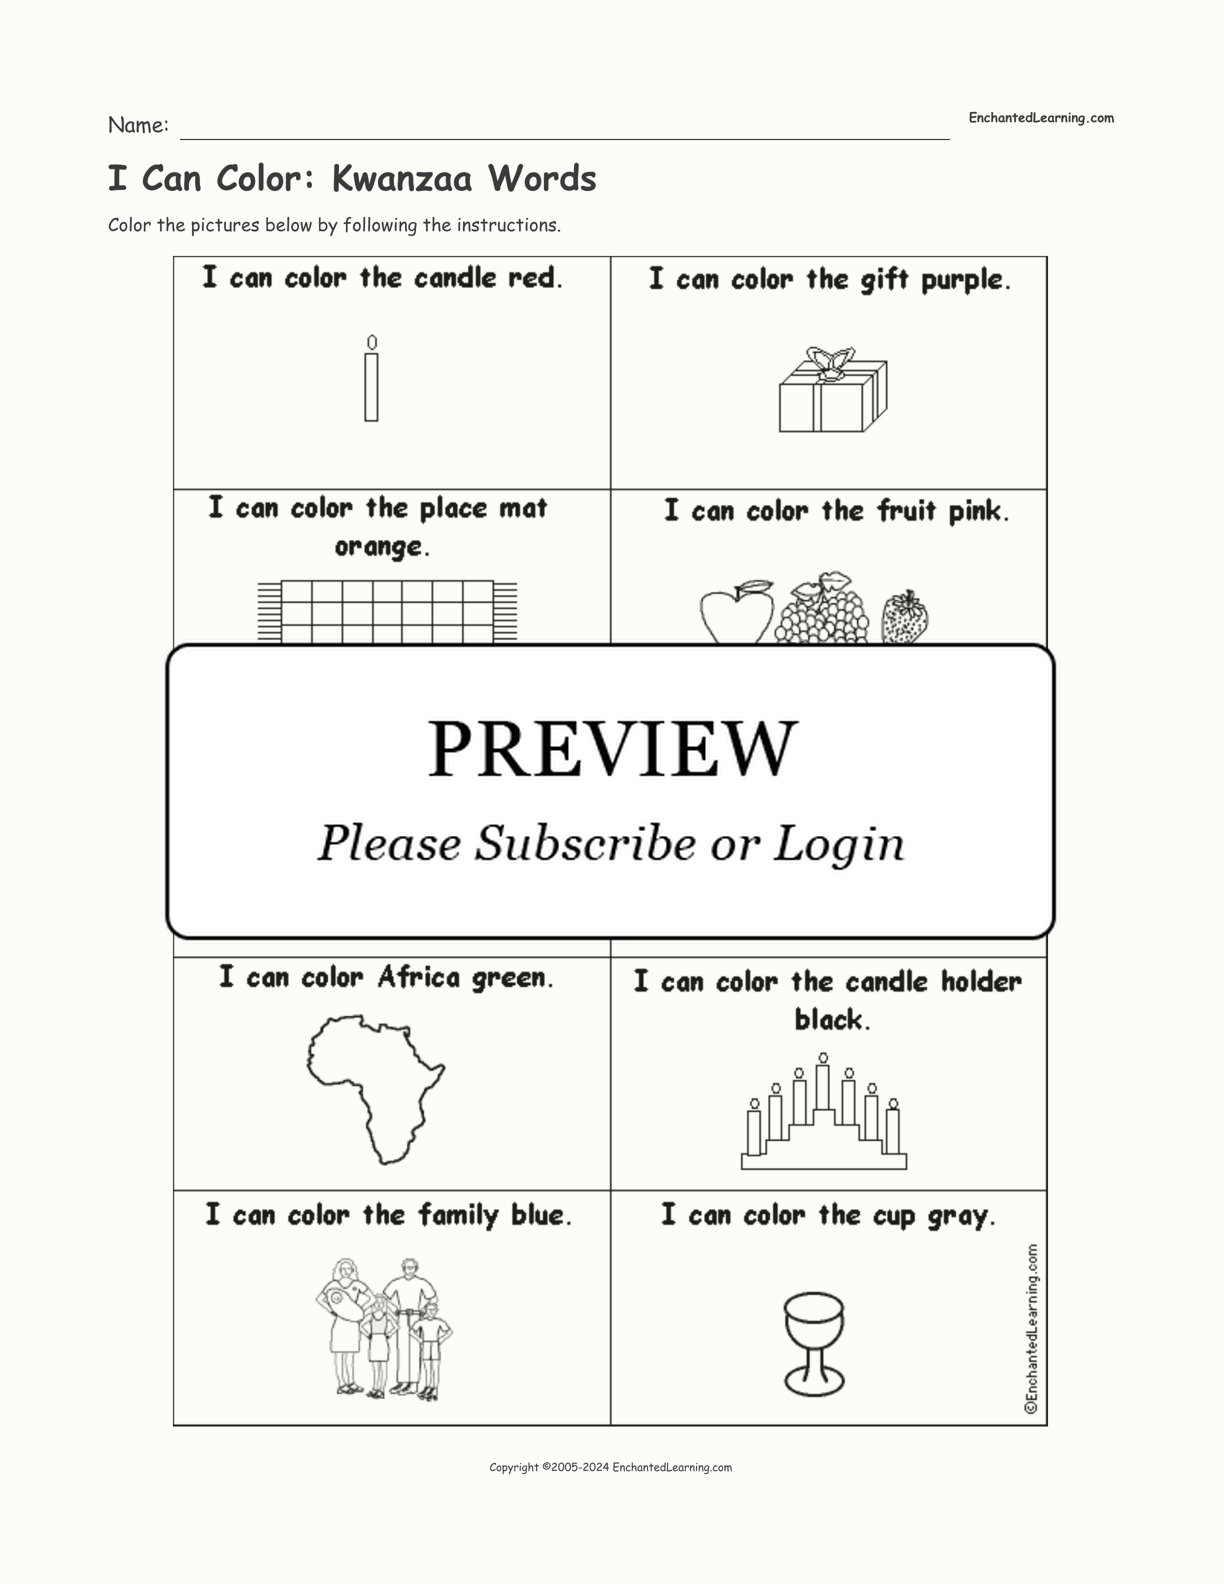 I Can Color: Kwanzaa Words interactive worksheet page 1